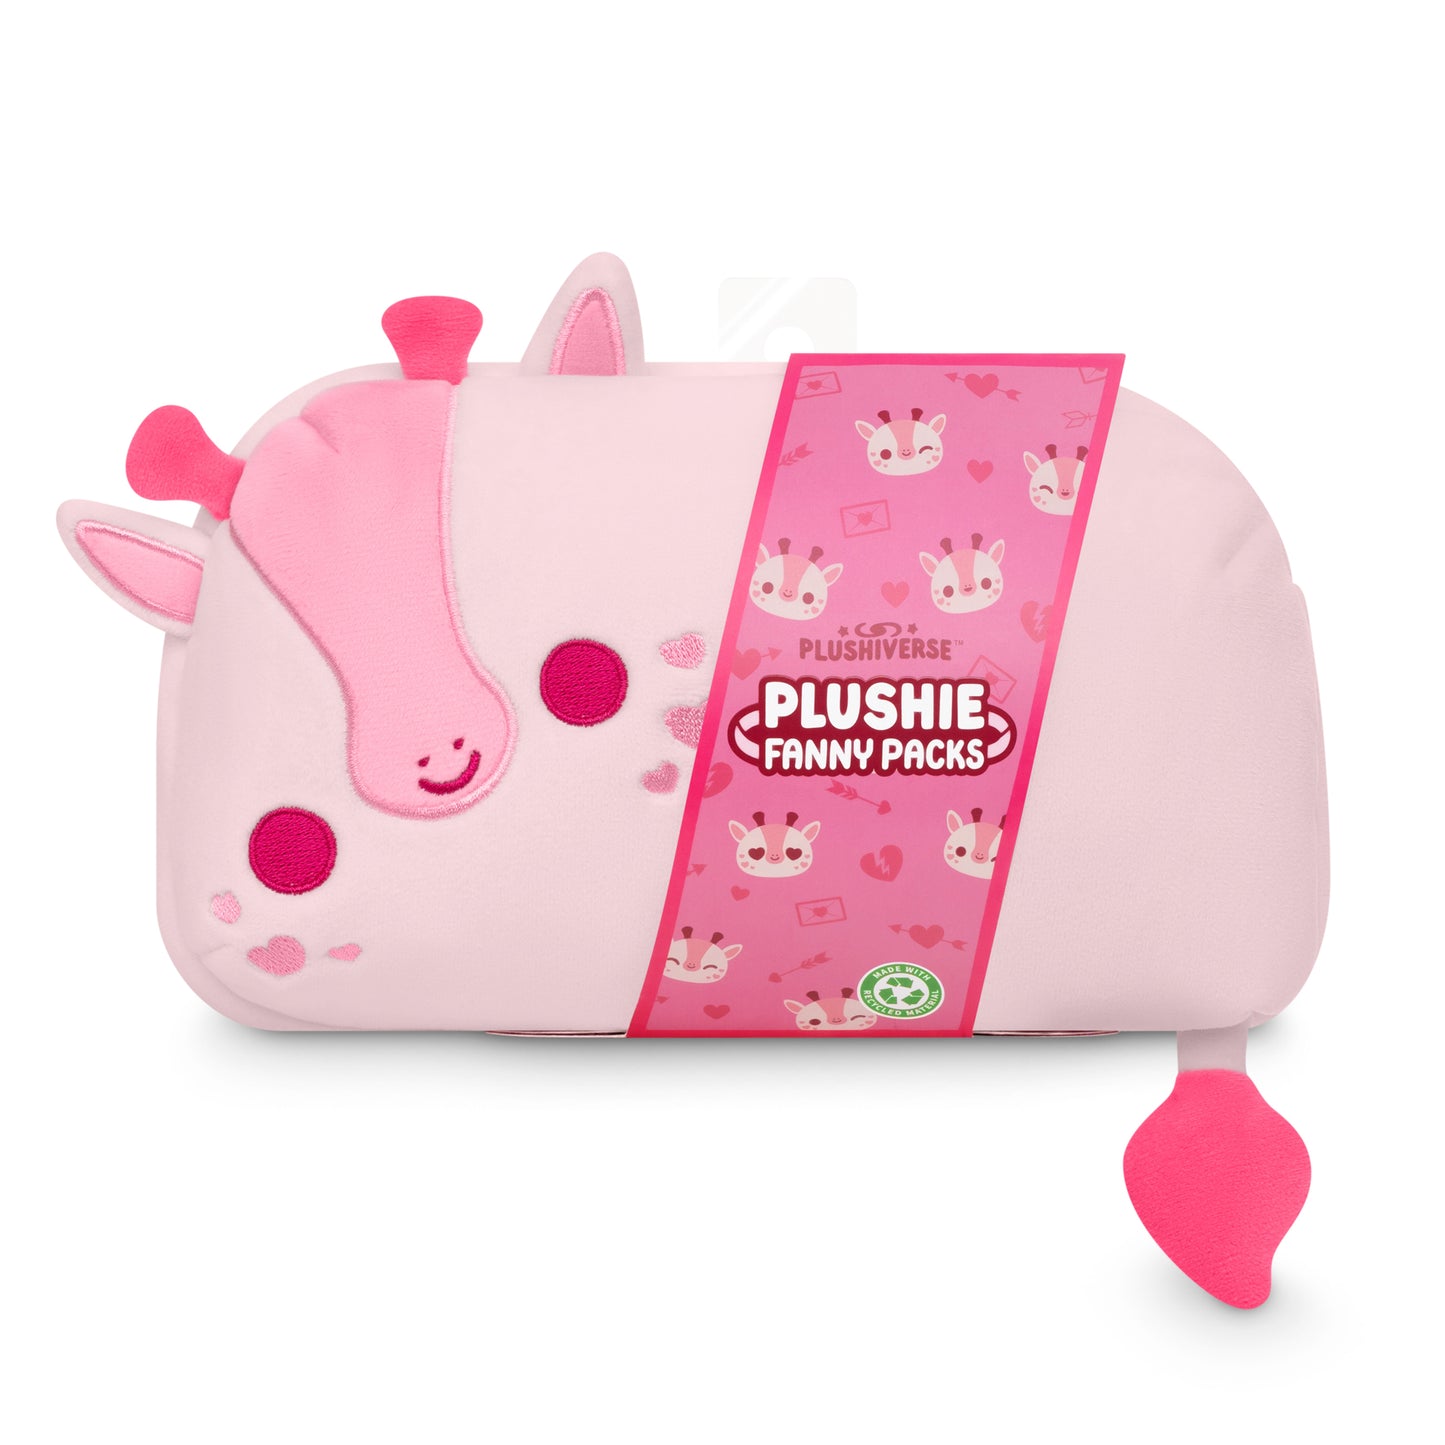 An adjustable belt pouch with a Plushiverse Blushing Giraffe Plushie Fanny Pack from TeeTurtle in pink, featuring a giraffe.